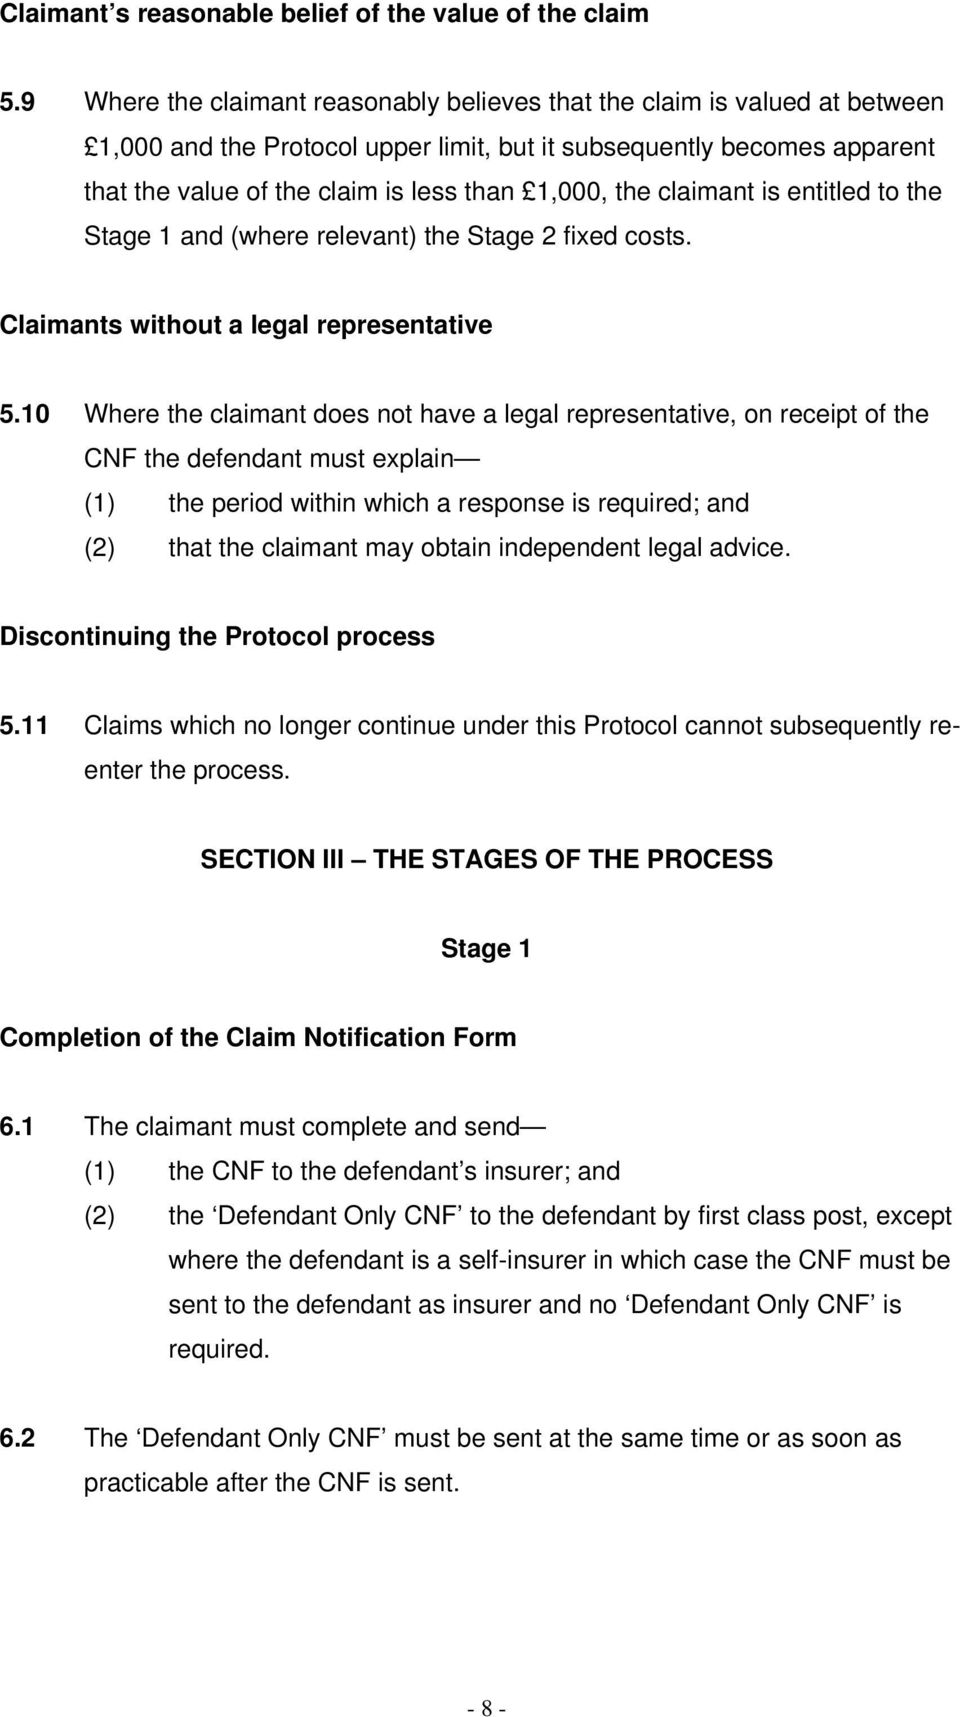 the claimant is entitled to the Stage 1 and (where relevant) the Stage 2 fixed costs. Claimants without a legal representative 5.